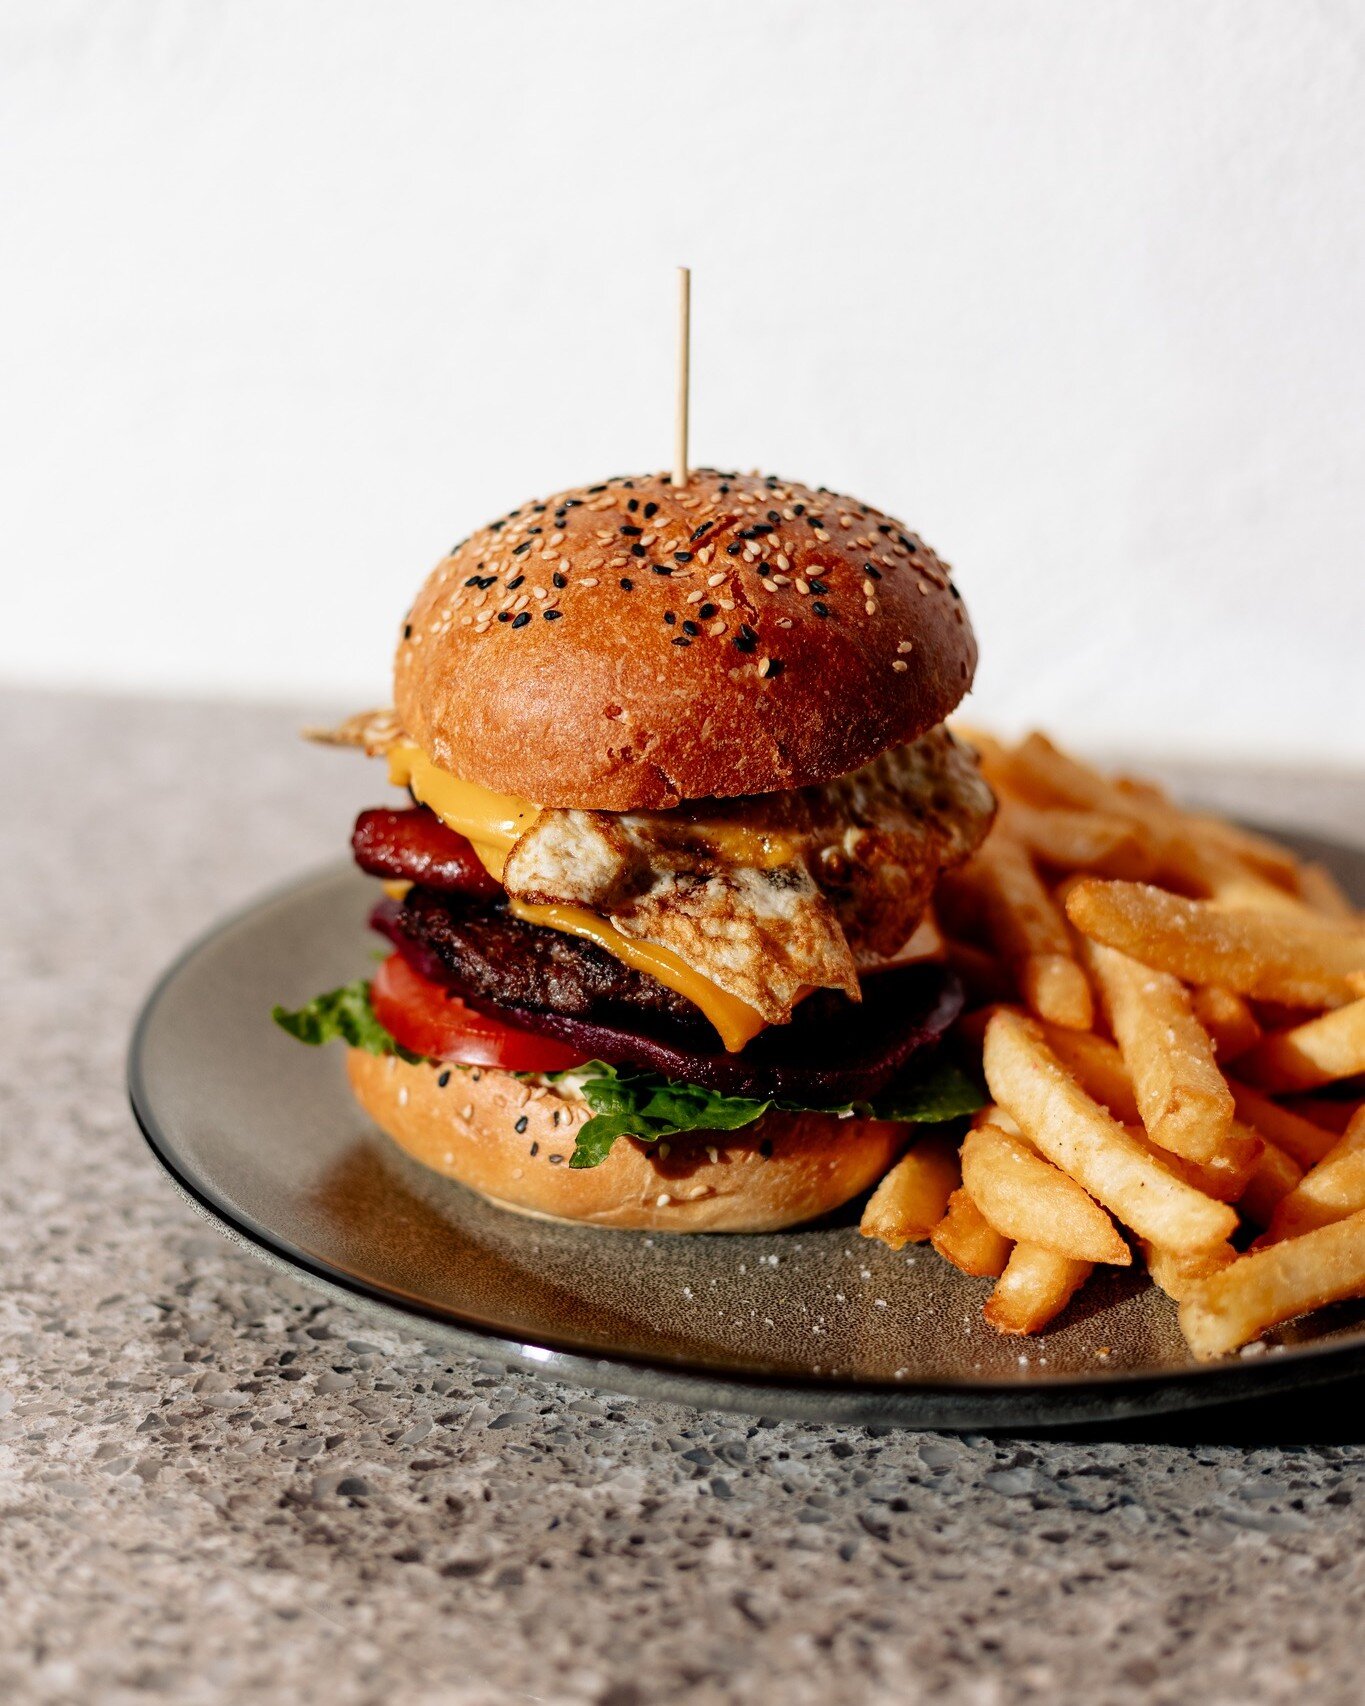 Sink your teeth into 'The Eagle Hawk', featuring double beef patties with bacon and caramelised onions sandwiched between lettuce, tomato, beetroot and fried egg on an irresistible milk bun. 

Served up with chips - it's perfect for any epic appetite